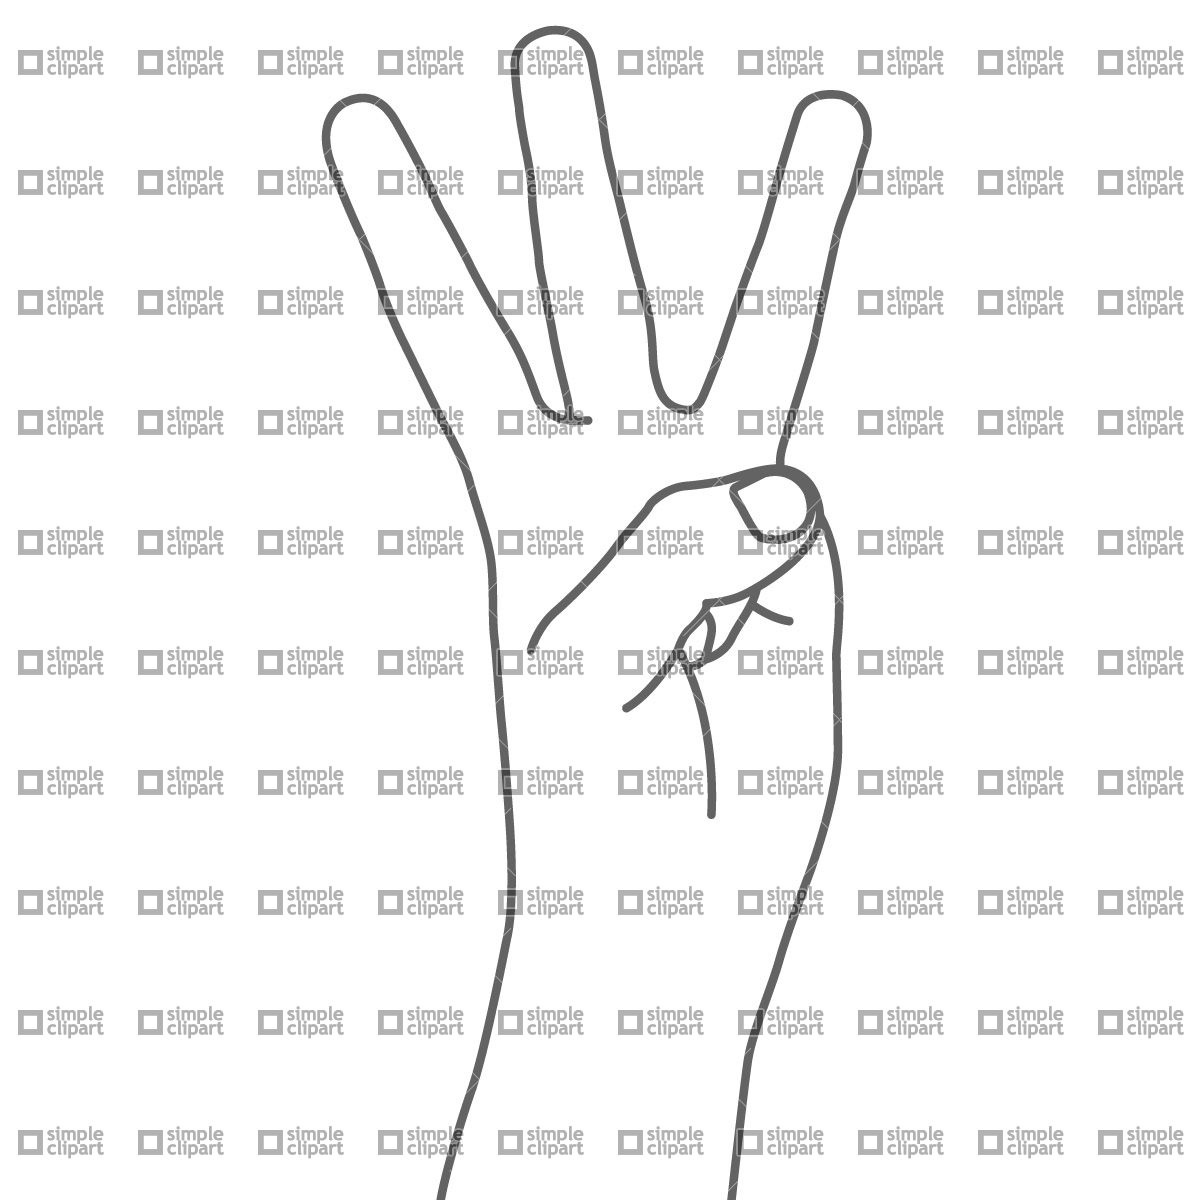 Three Fingers Hand Sign Download Royalty Free Vector Clipart  Eps 